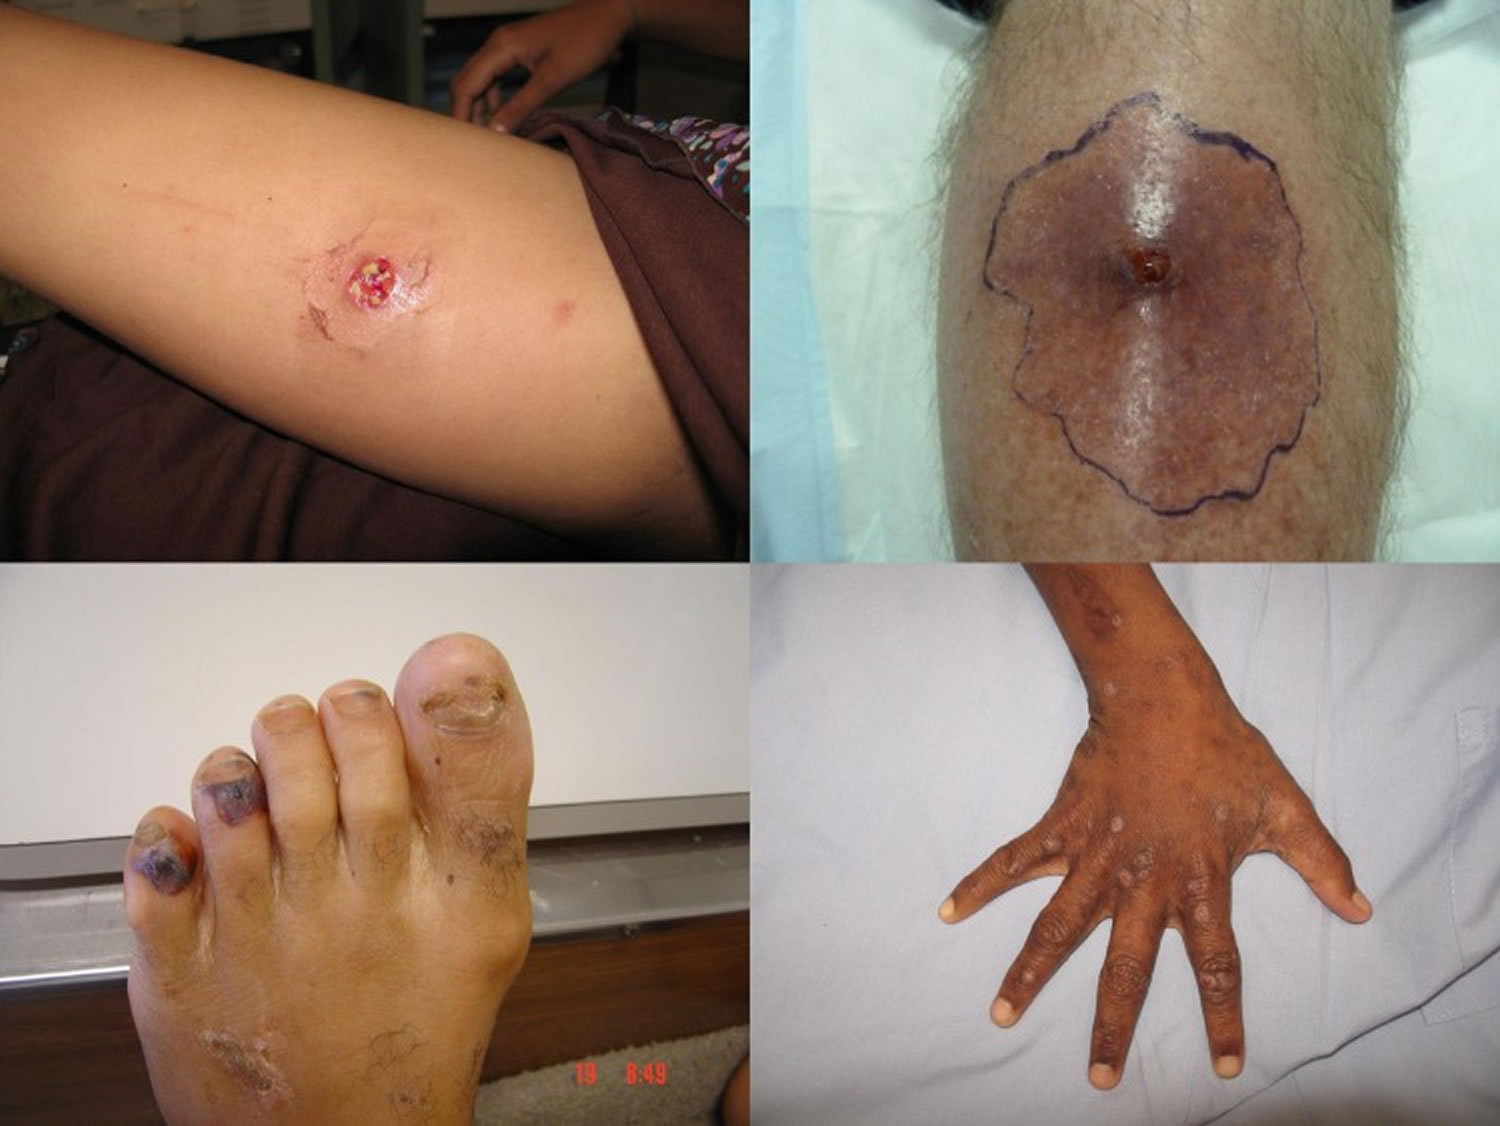 Staph skin and soft tissue infections